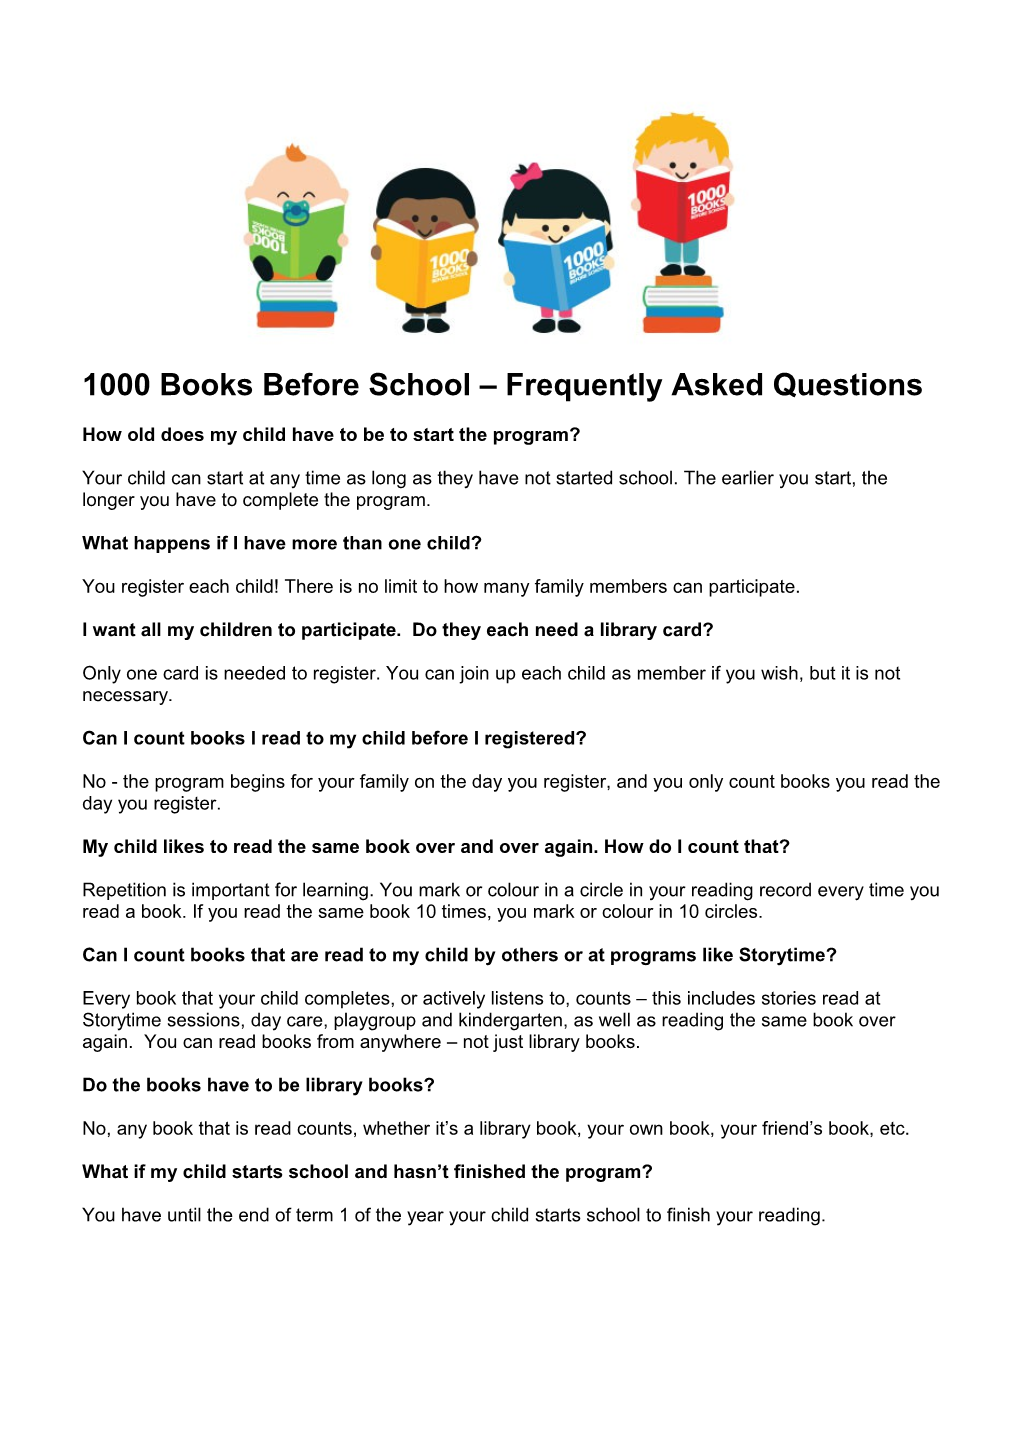 1000 Books Before School Frequently Asked Questions